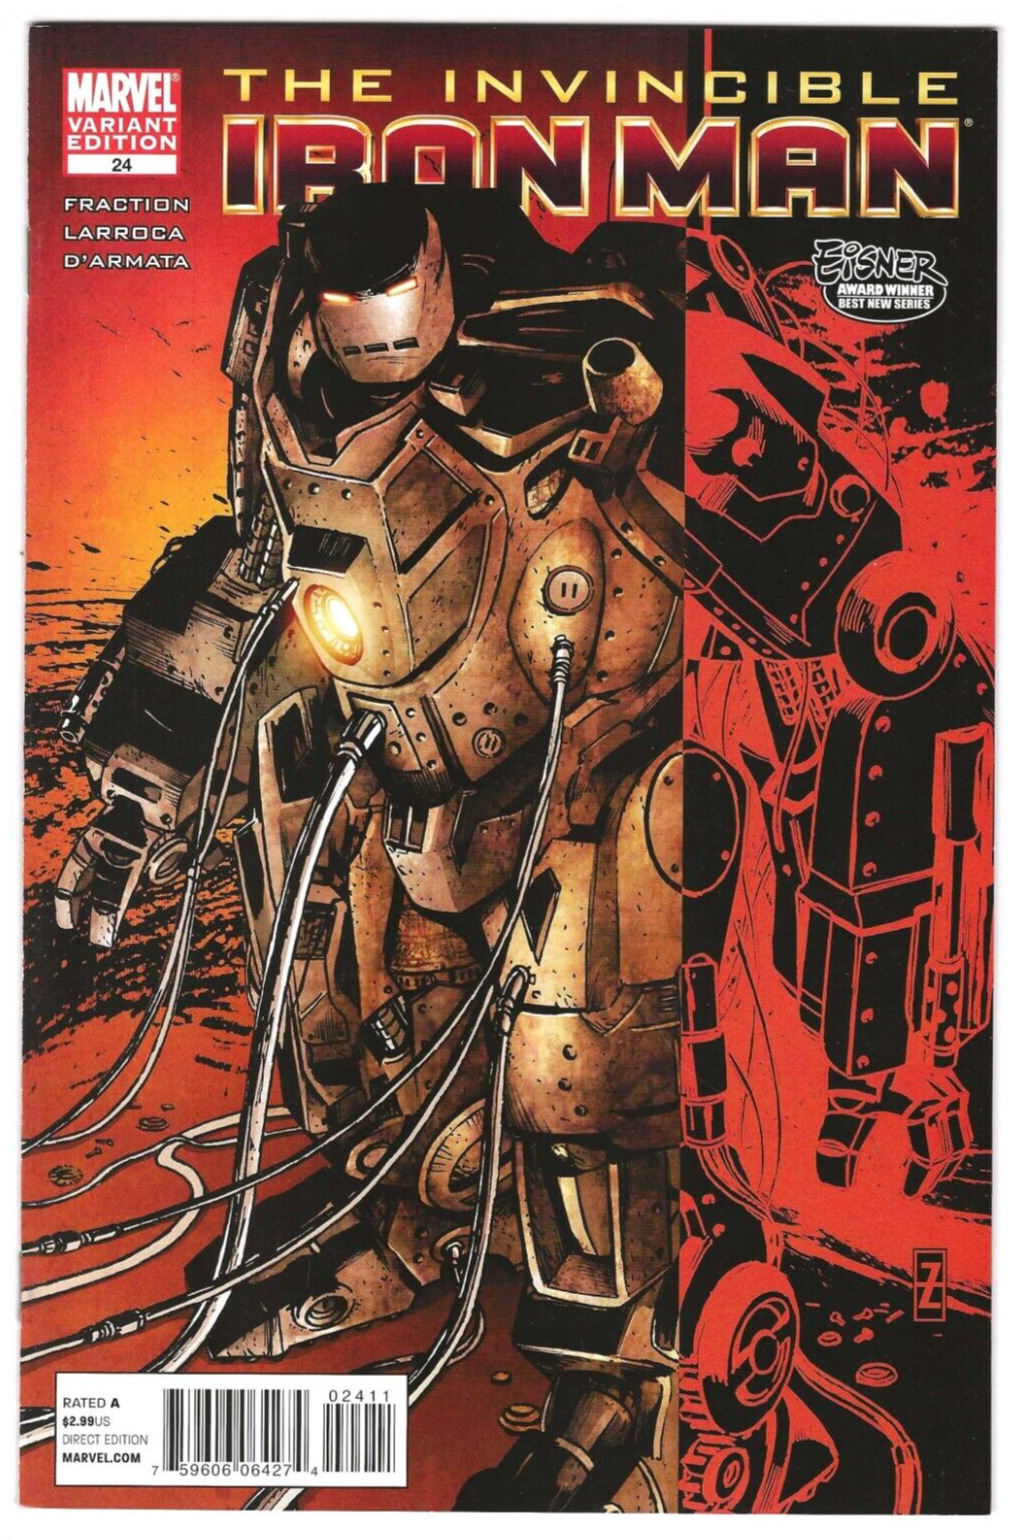 Marvel Comics THE INVINCIBLE IRON MAN #24 first printing variant cover